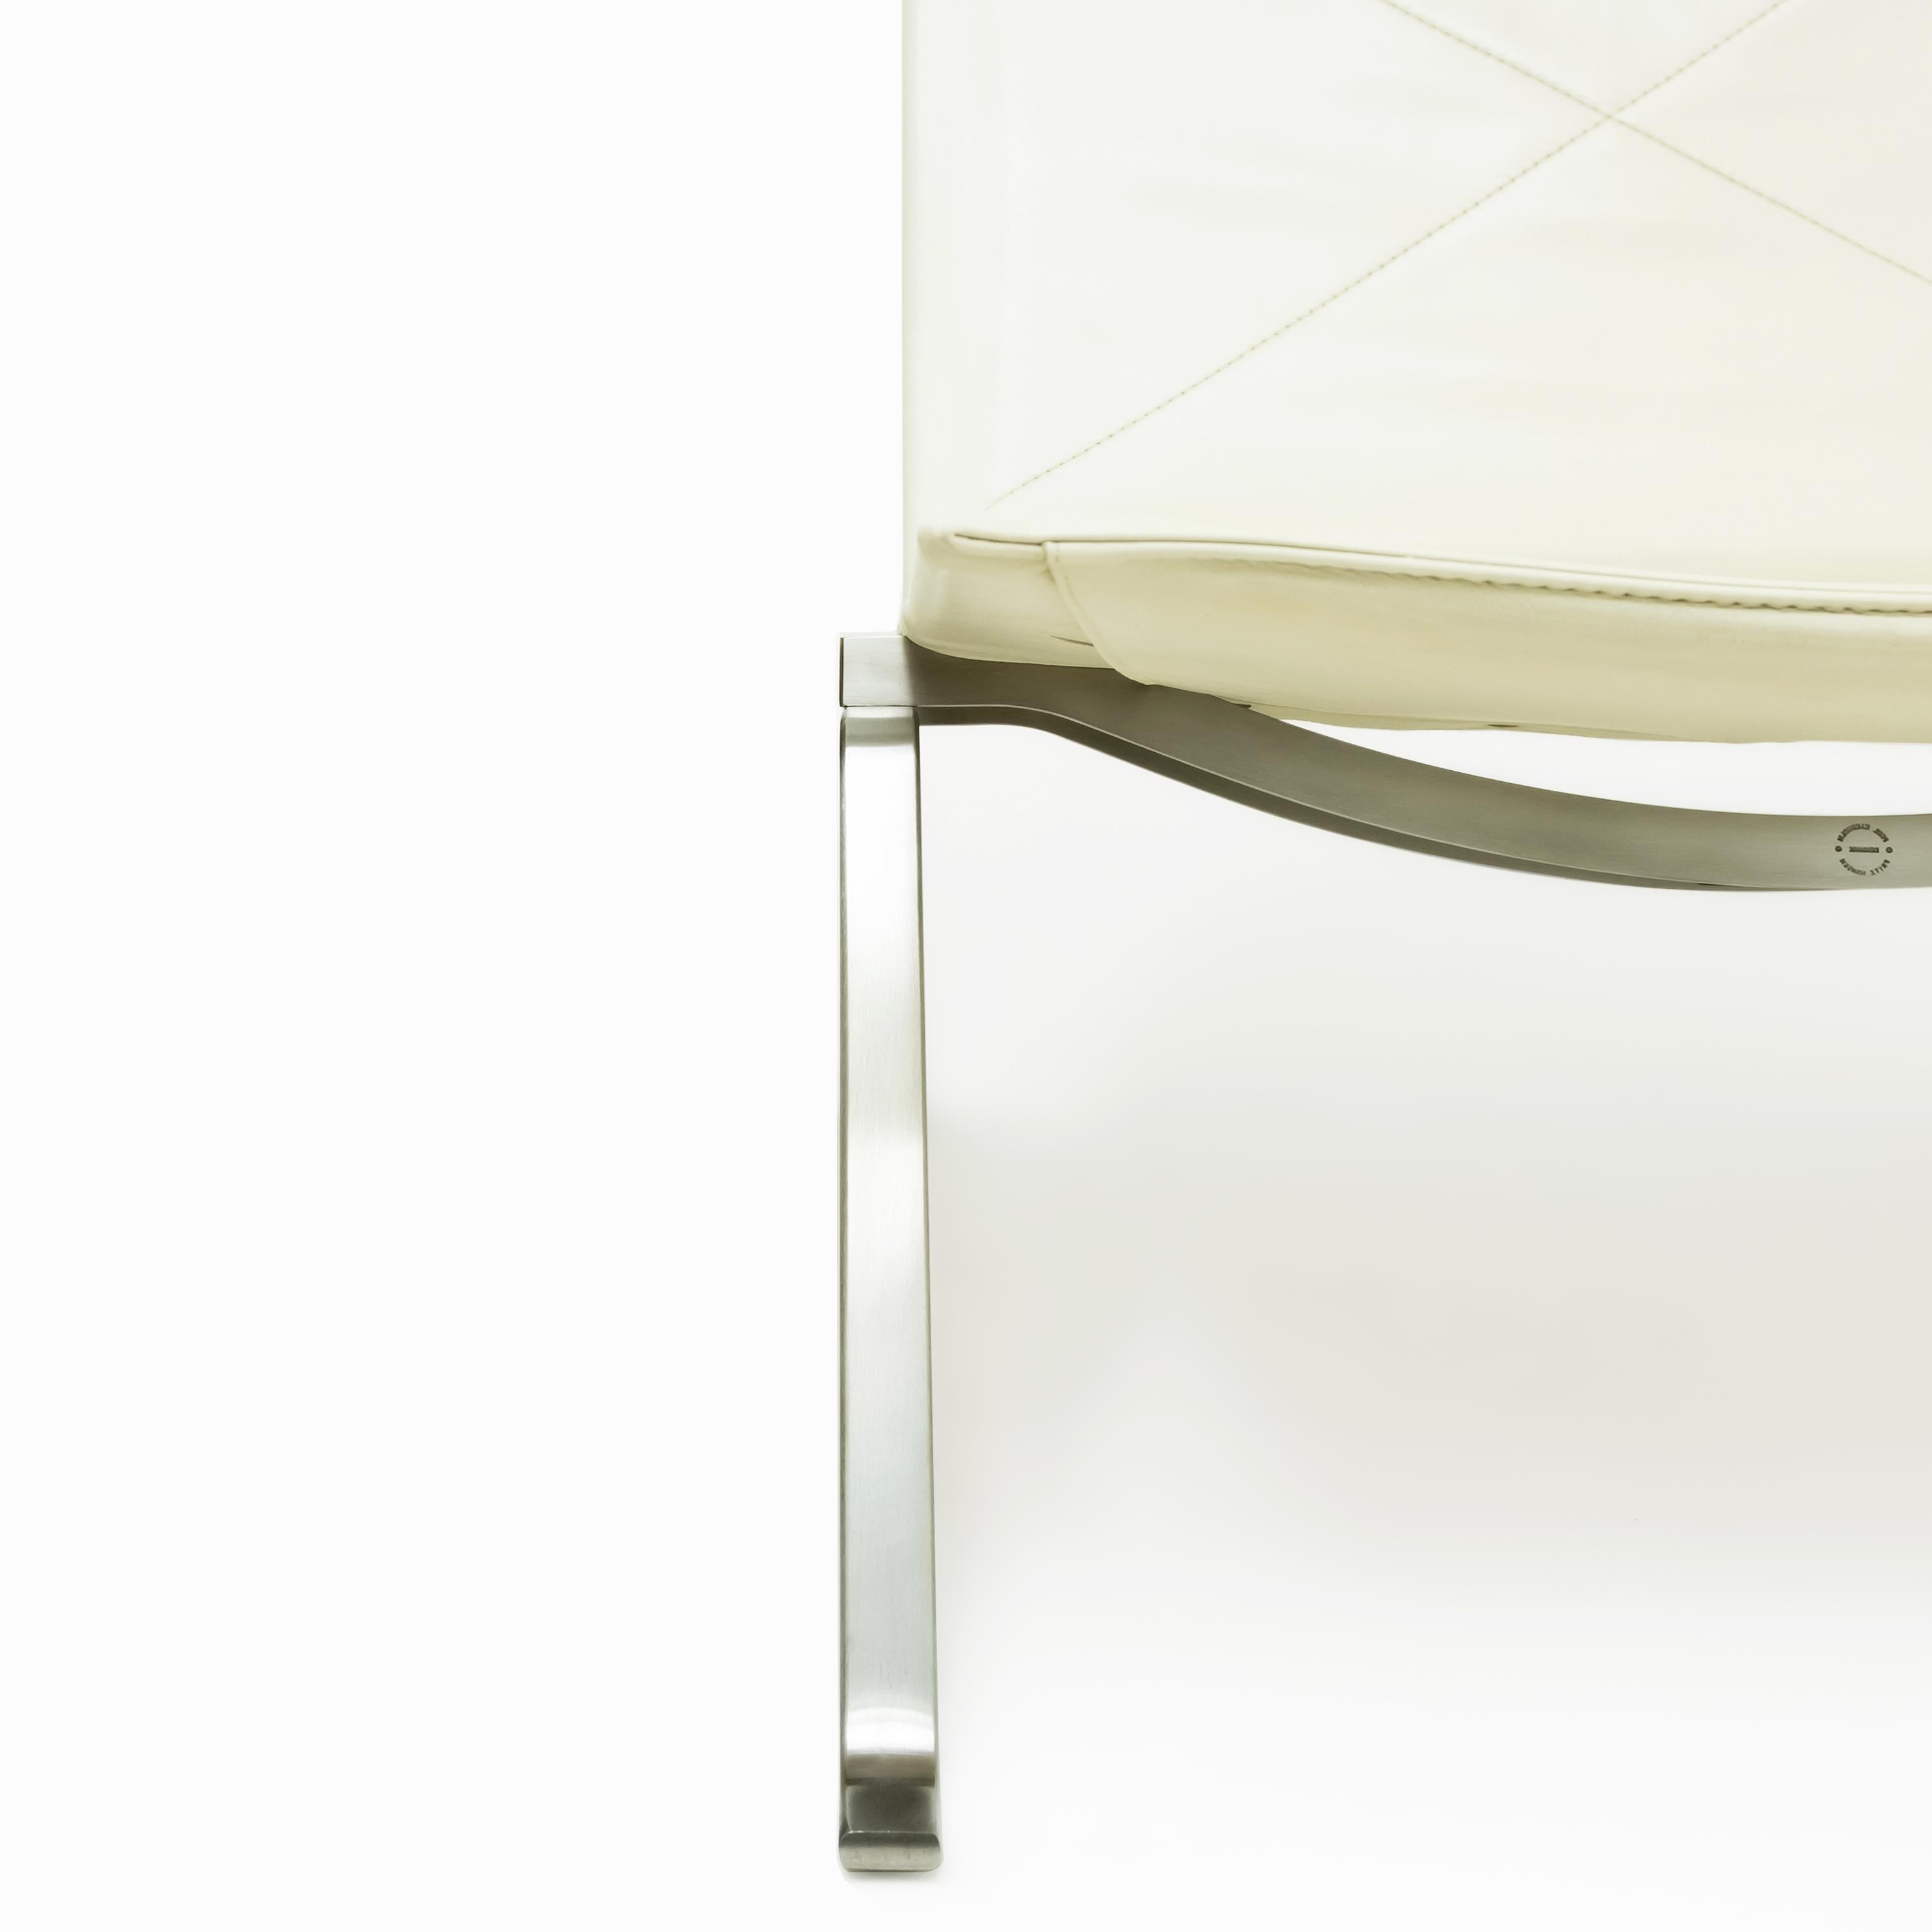 Steel Poul Kjaerholm PK22 Lounge Chair in Cream Leather for Fritz Hansen '2 Available'